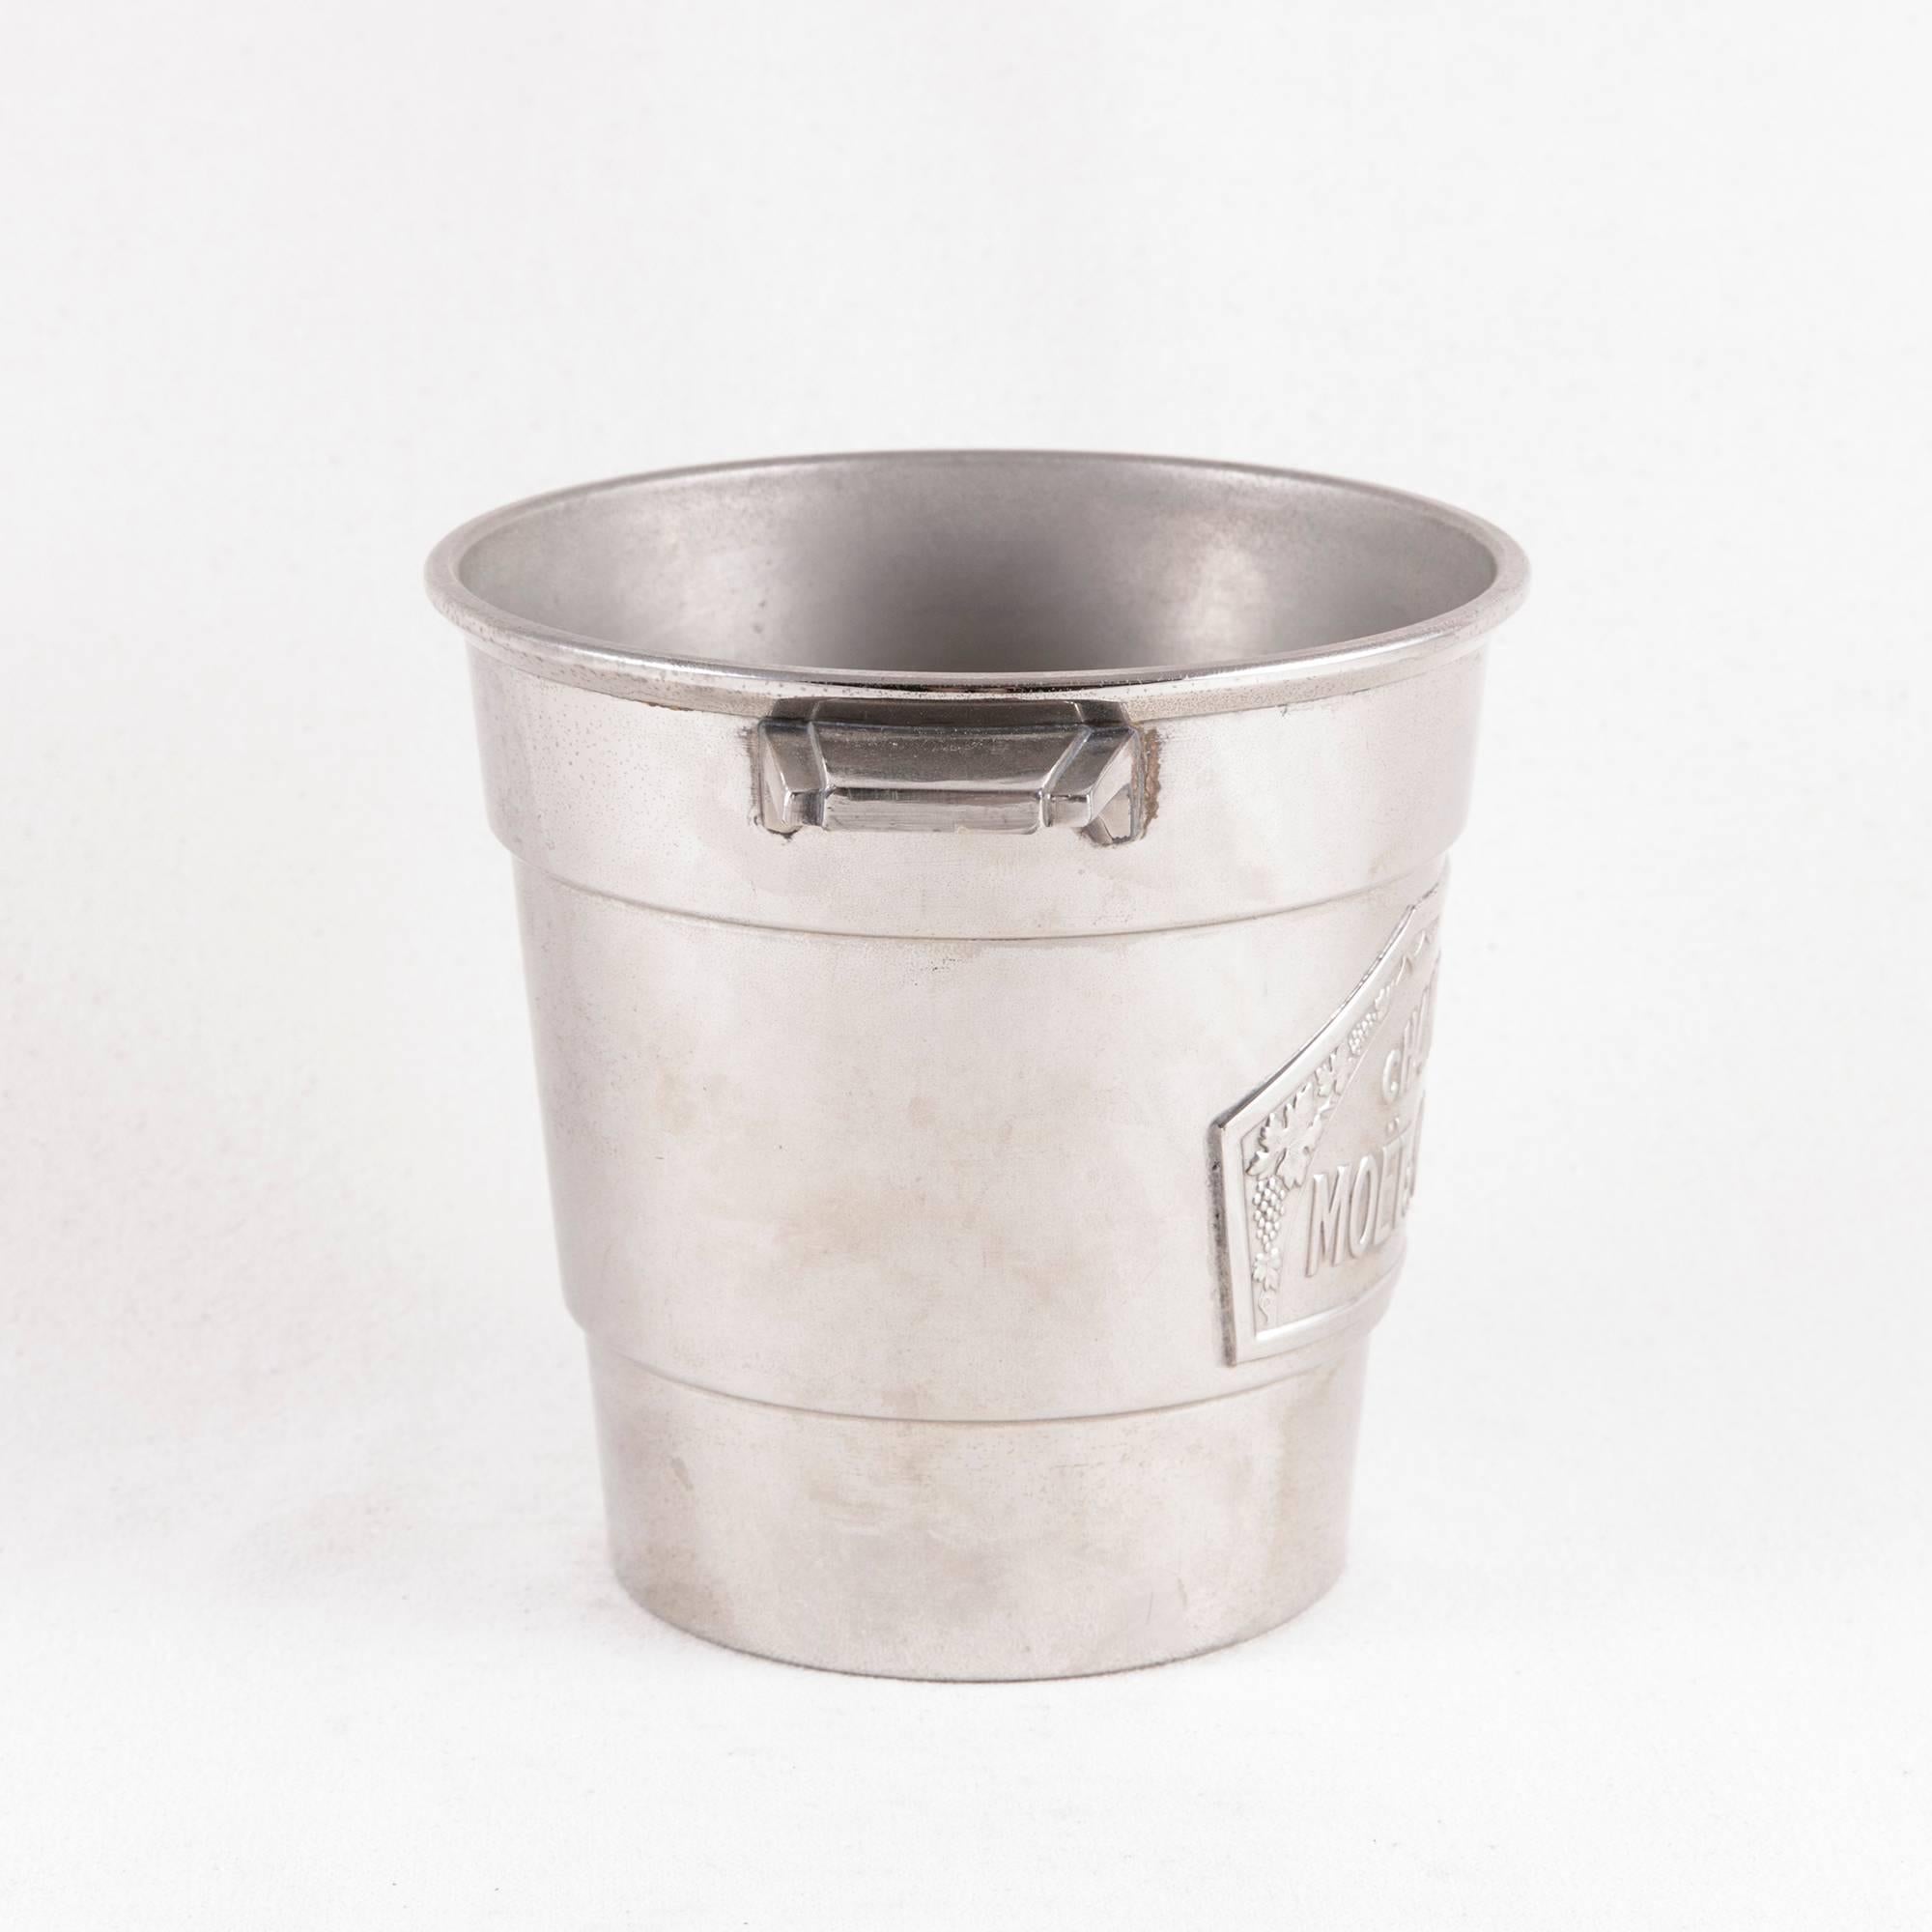 French Art Deco Period Small-Scale Silver Plate Moet et Chandon Champagne Bucket 1